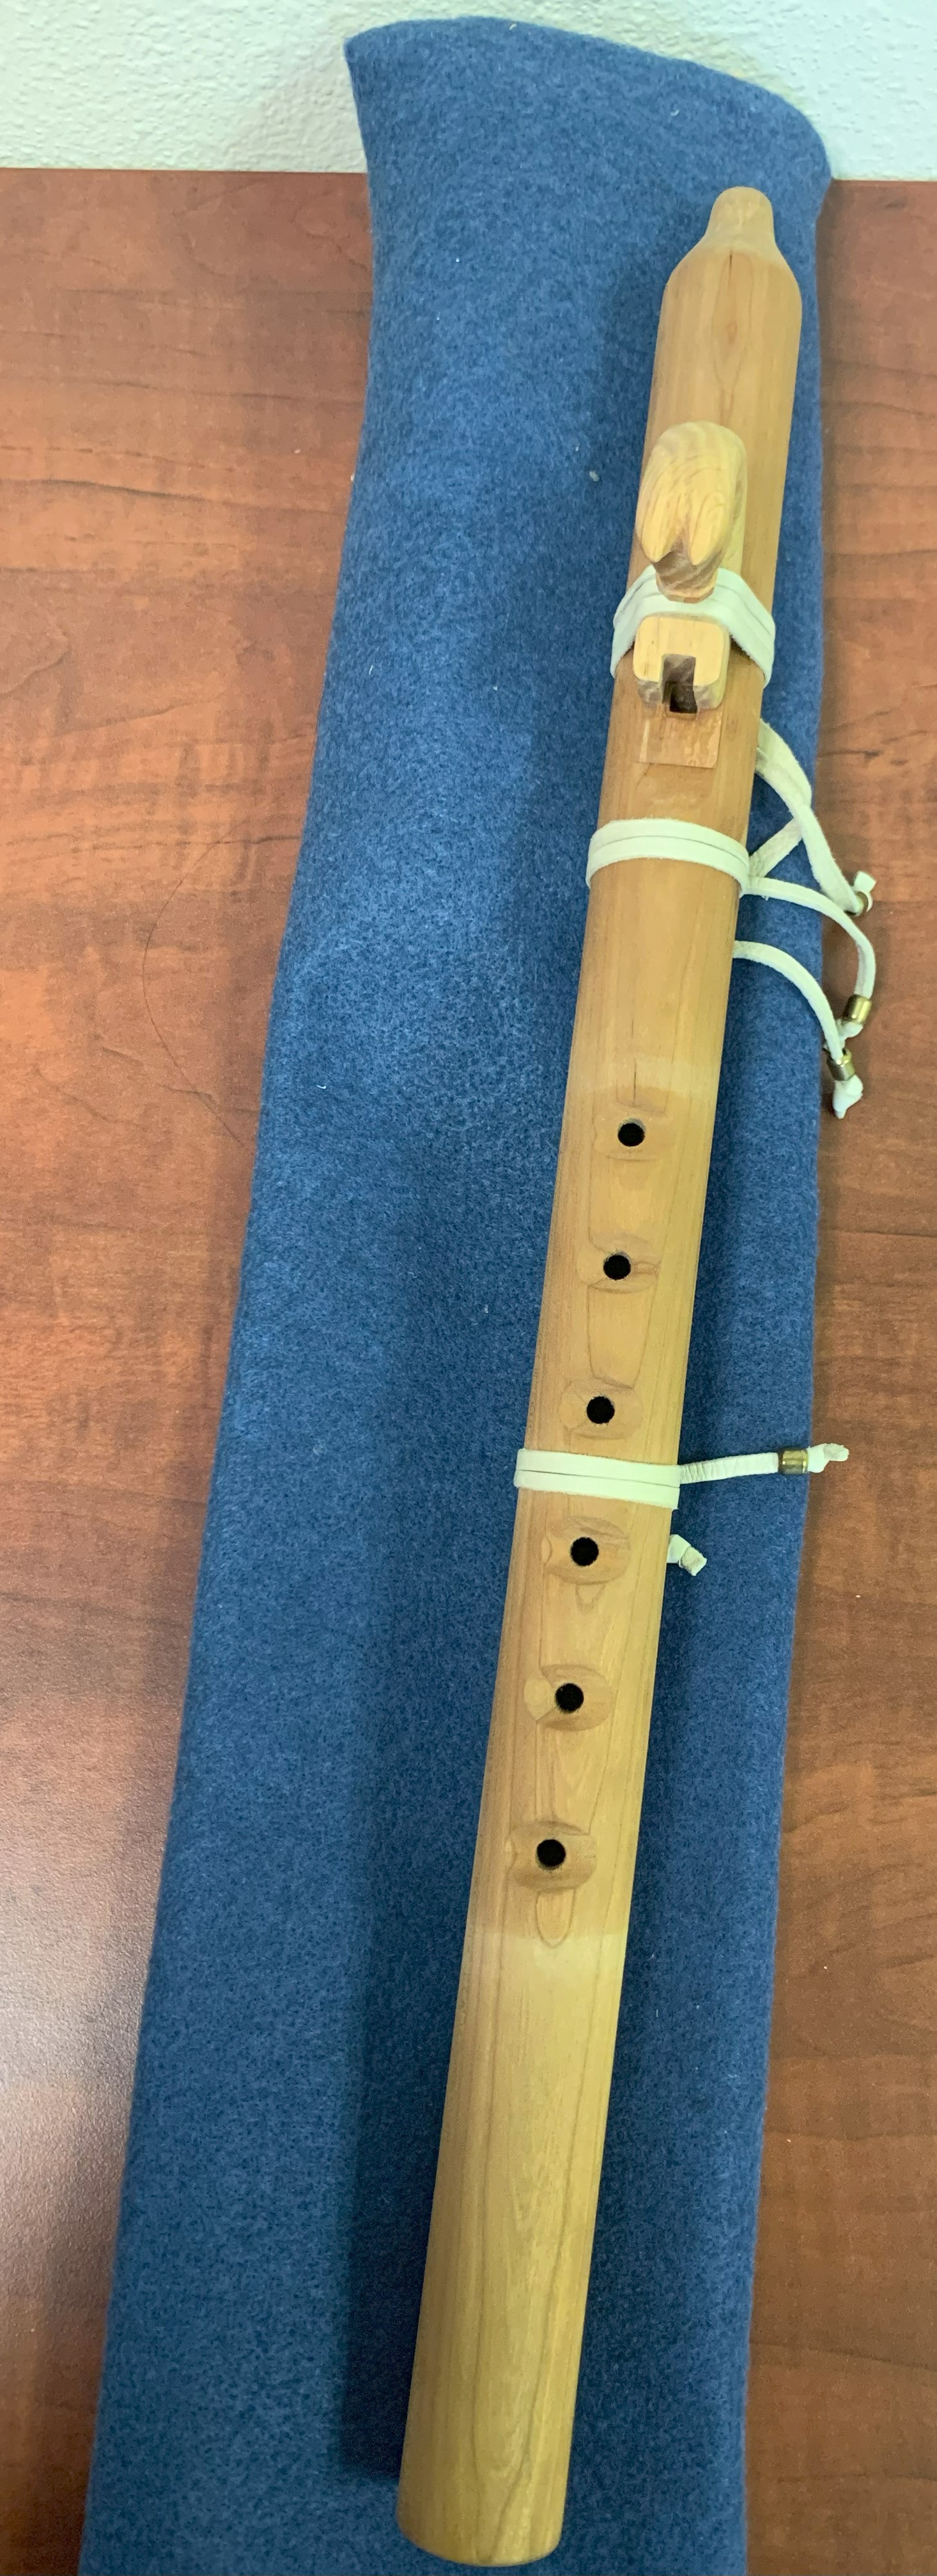 This finely carved wooden flute ornamented with a carved horse and additional leather and bead work could serve as an instrument or decorative piece.  Assumed to be of Ojibwe/Anishinaabe origin. Estimated value: $75.00